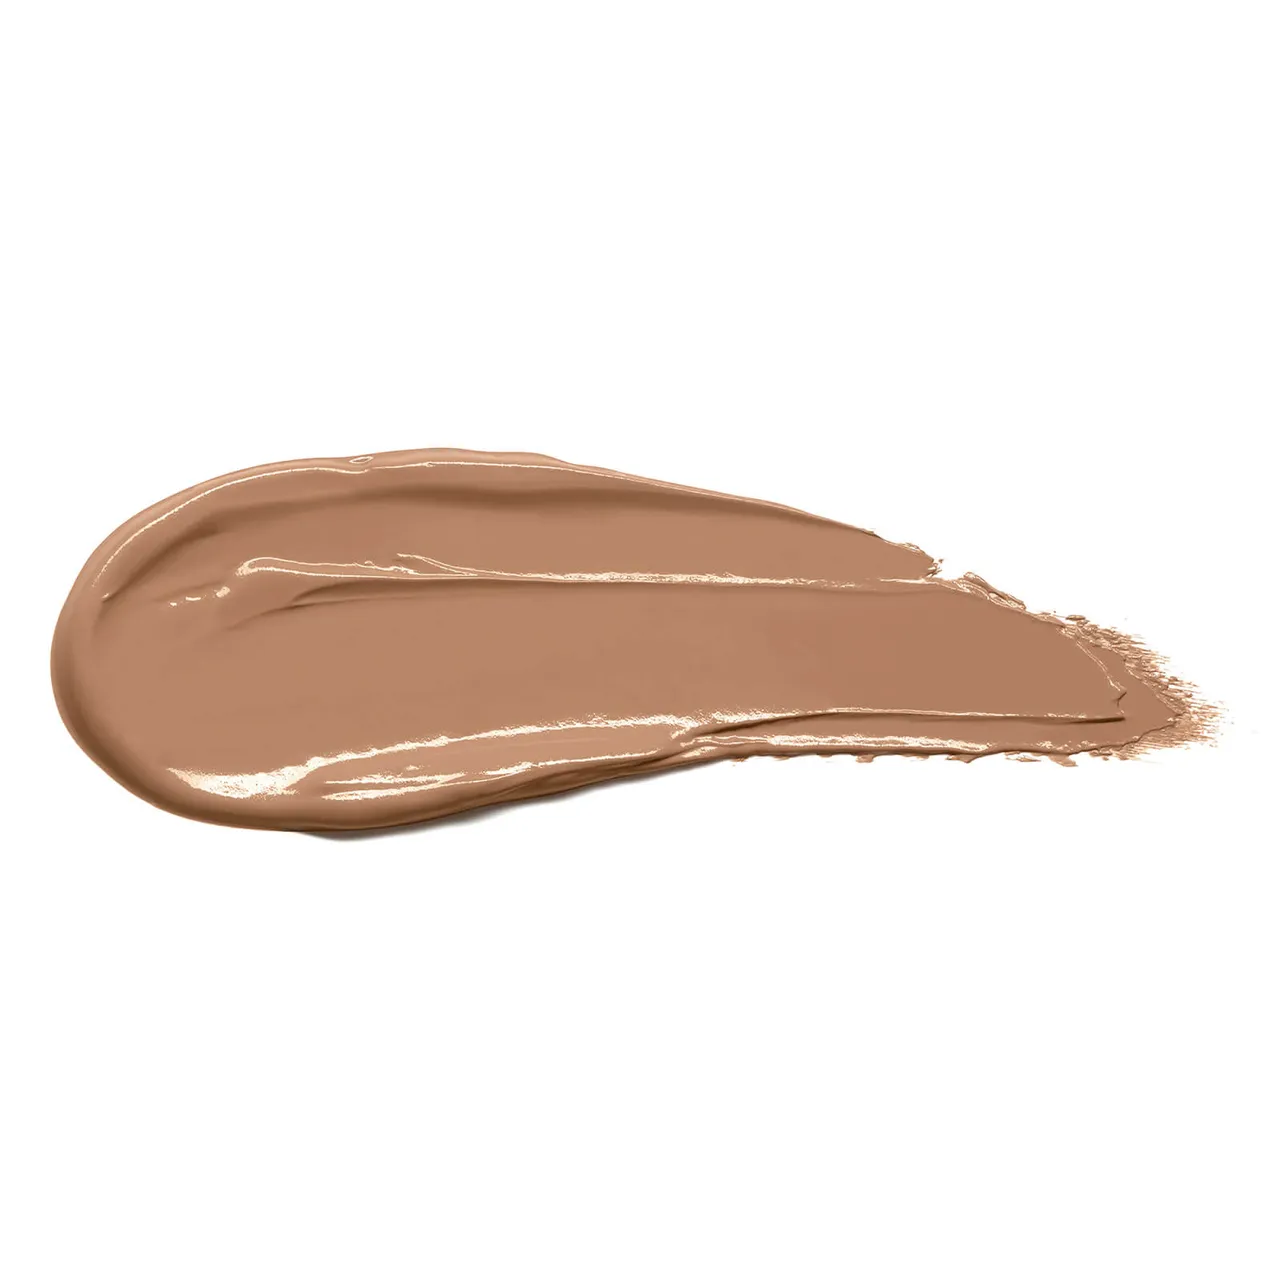 Urban Decay Stay Naked Quickie Concealer 16.4ml (Various Shades) - 41NN